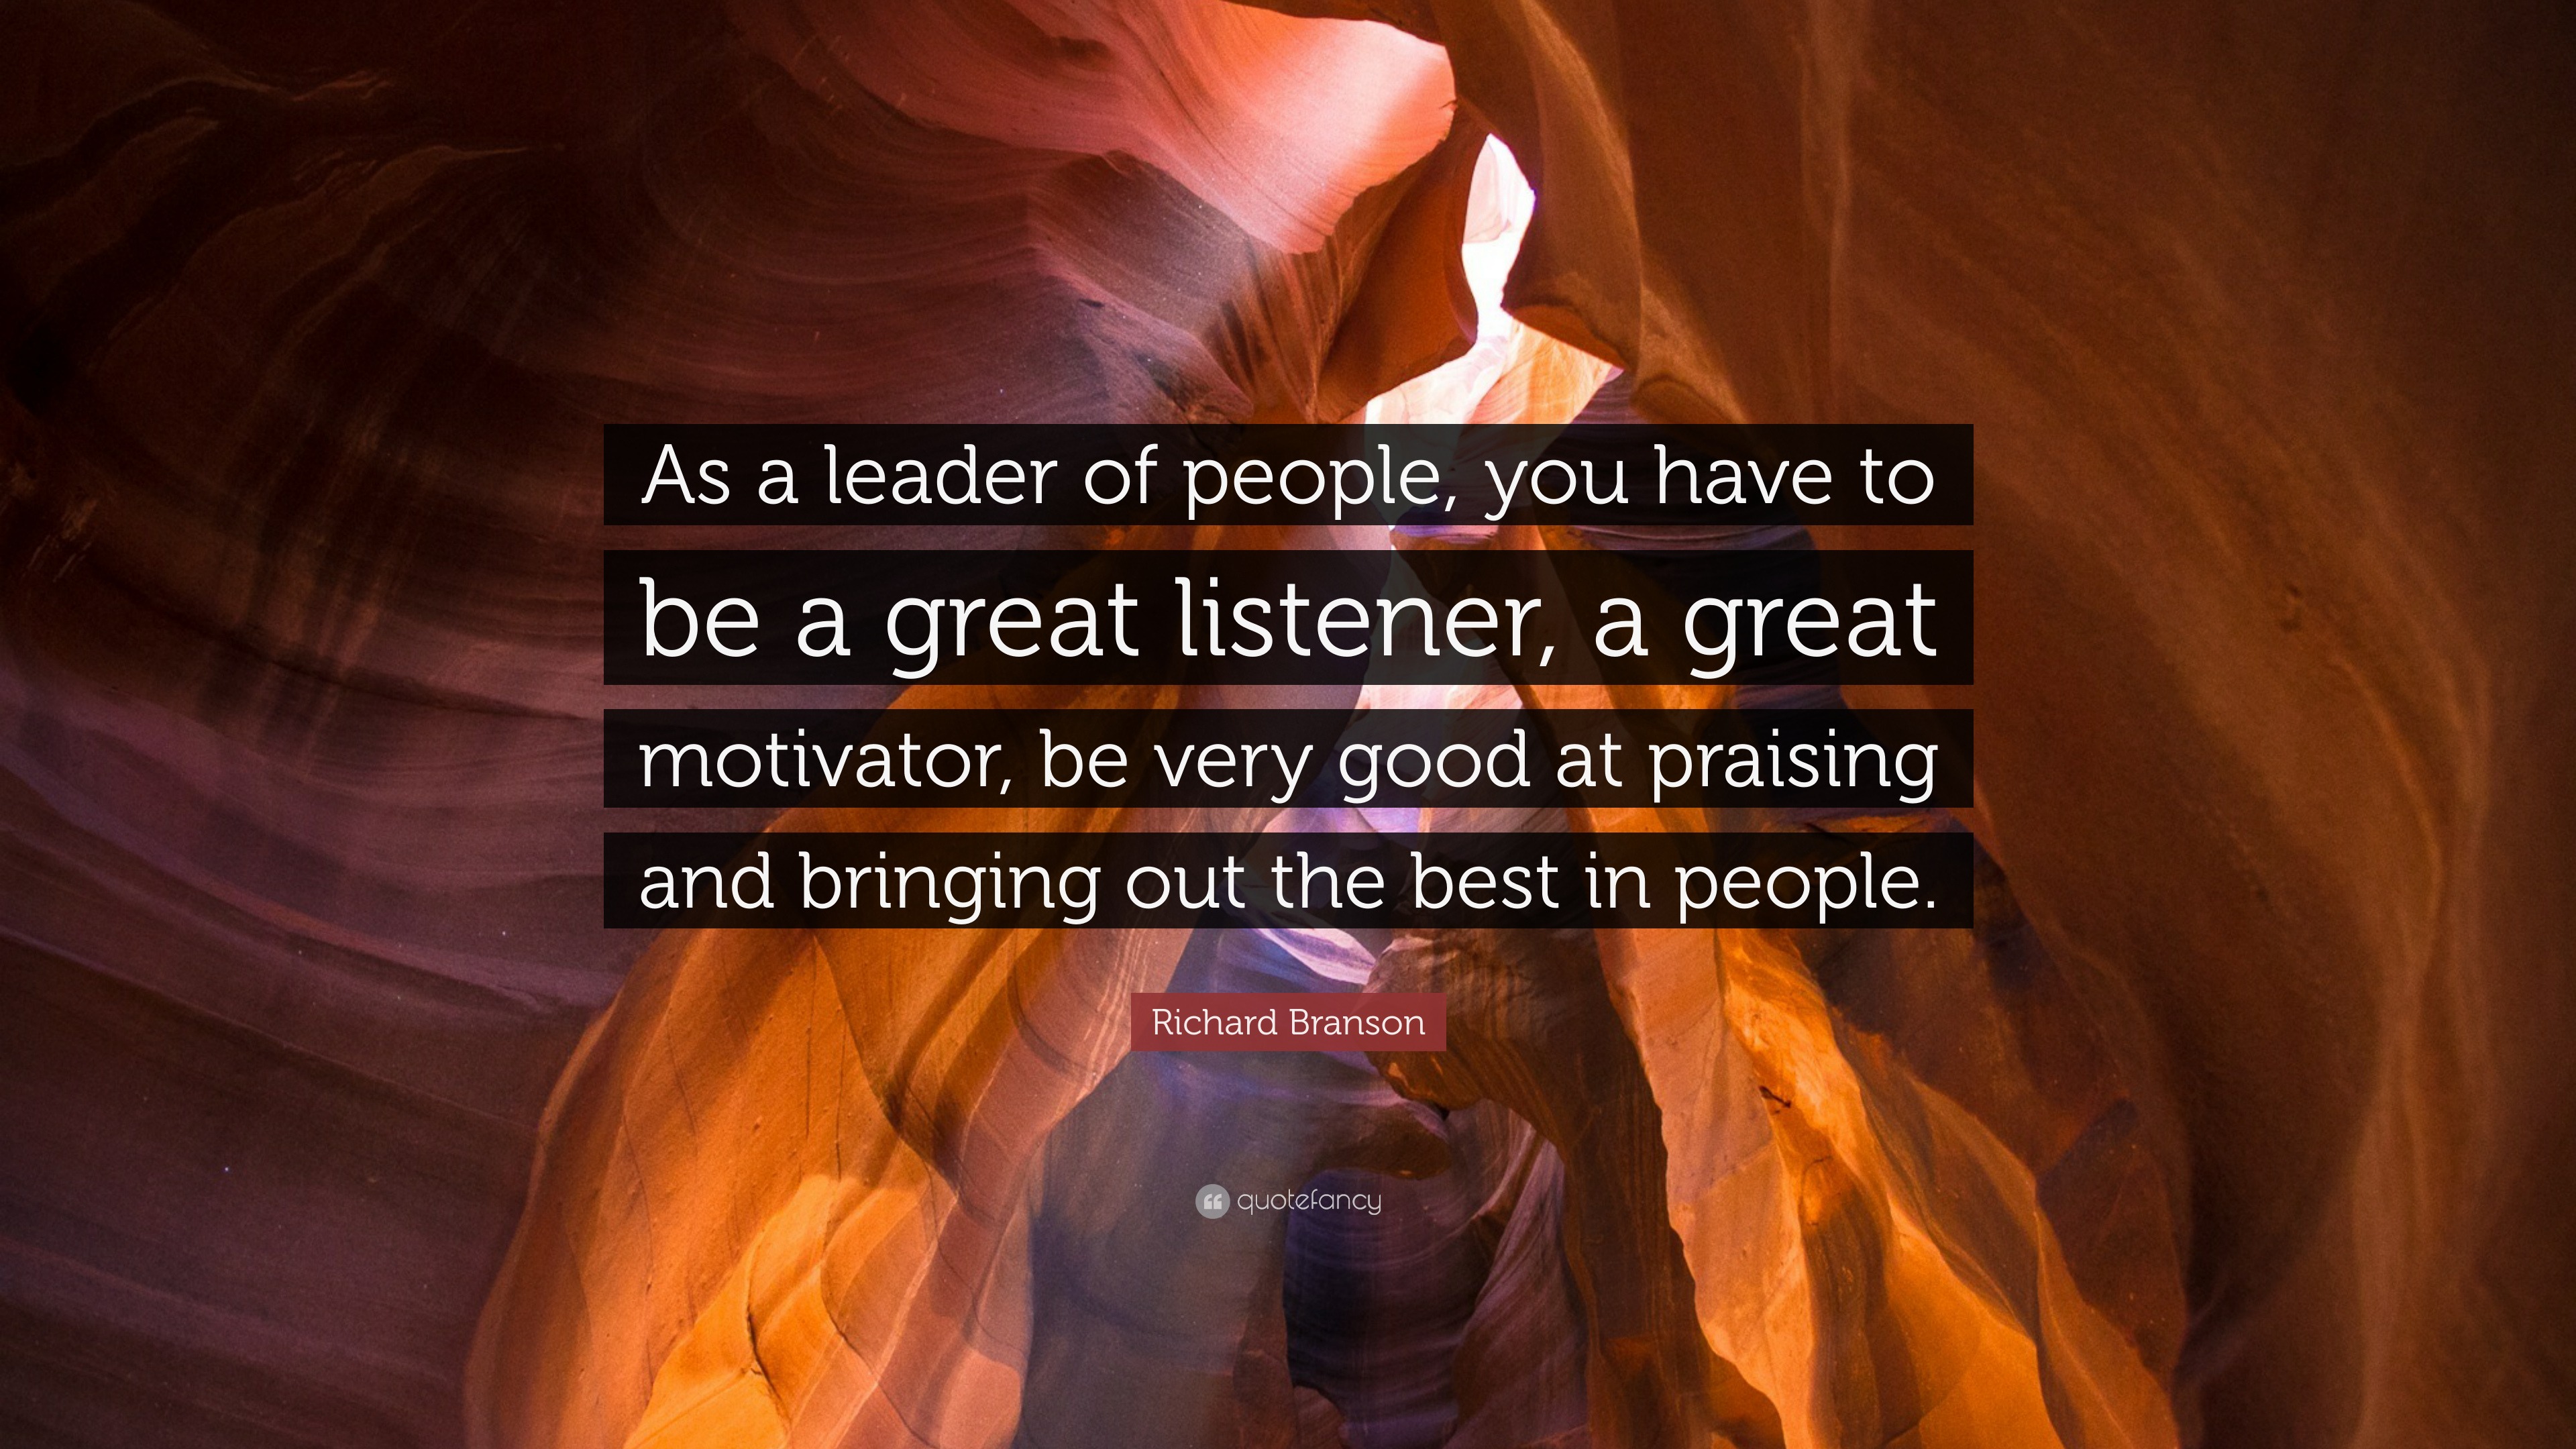 Richard Branson Quote: “As a leader of people, you have to be a great